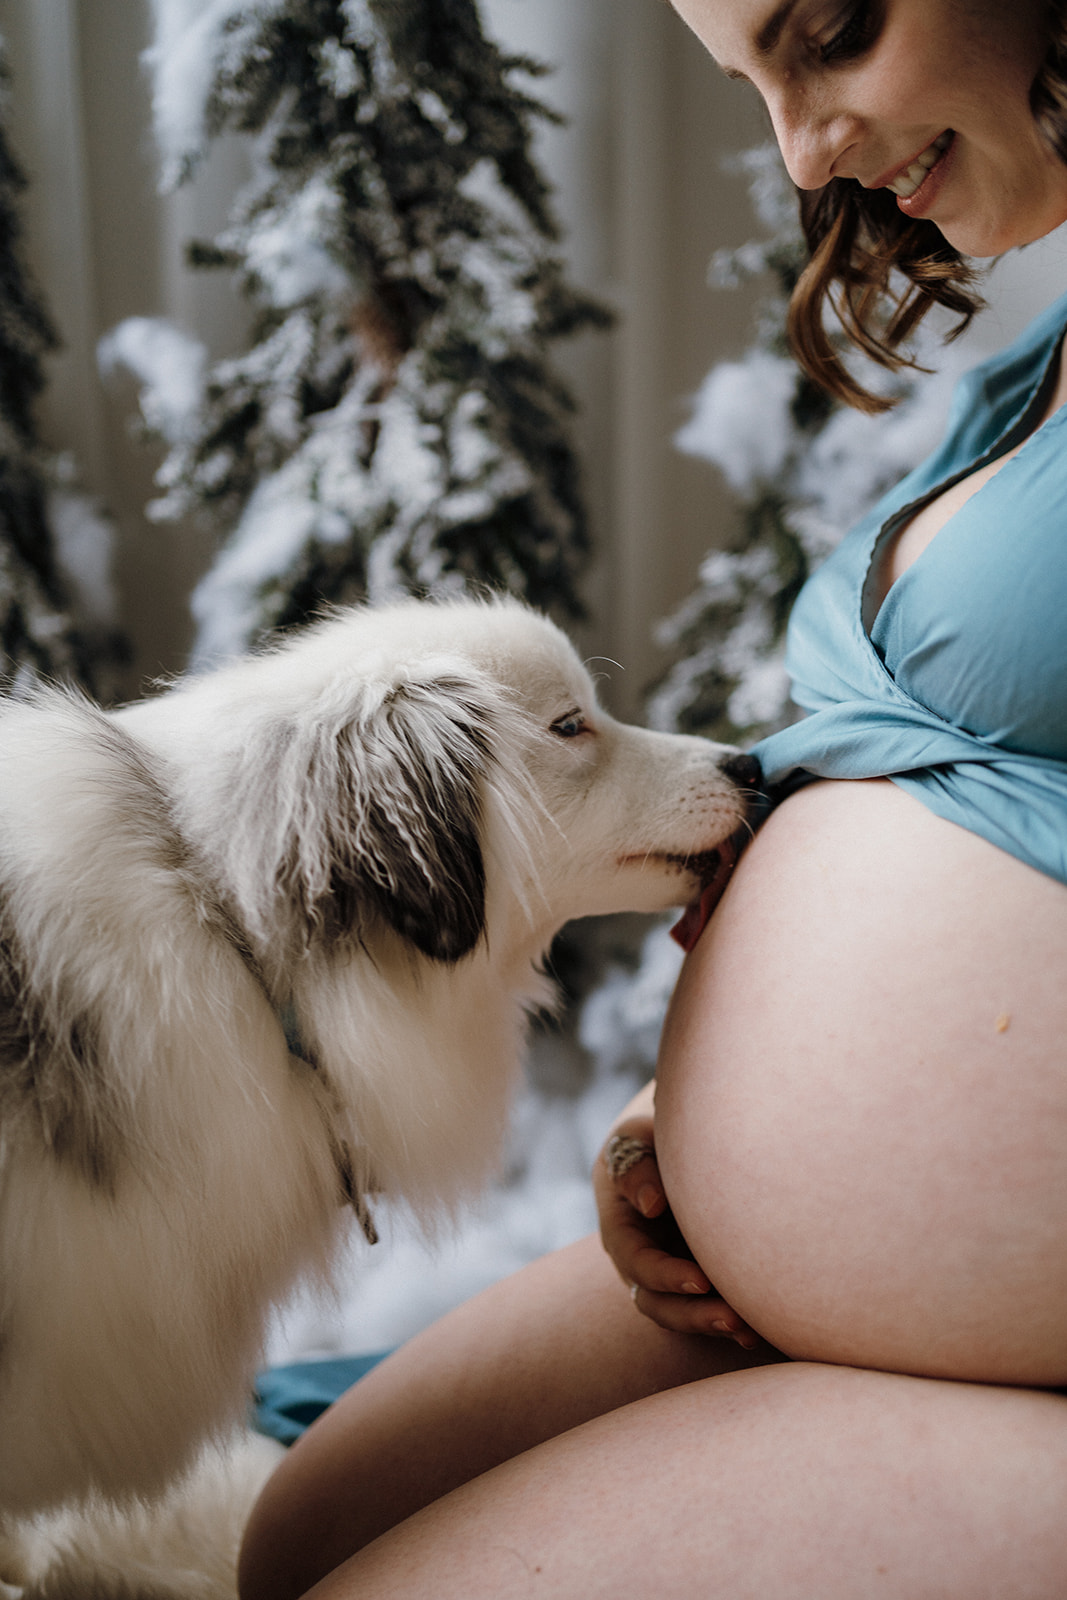 A dog licking a lady's stomach.